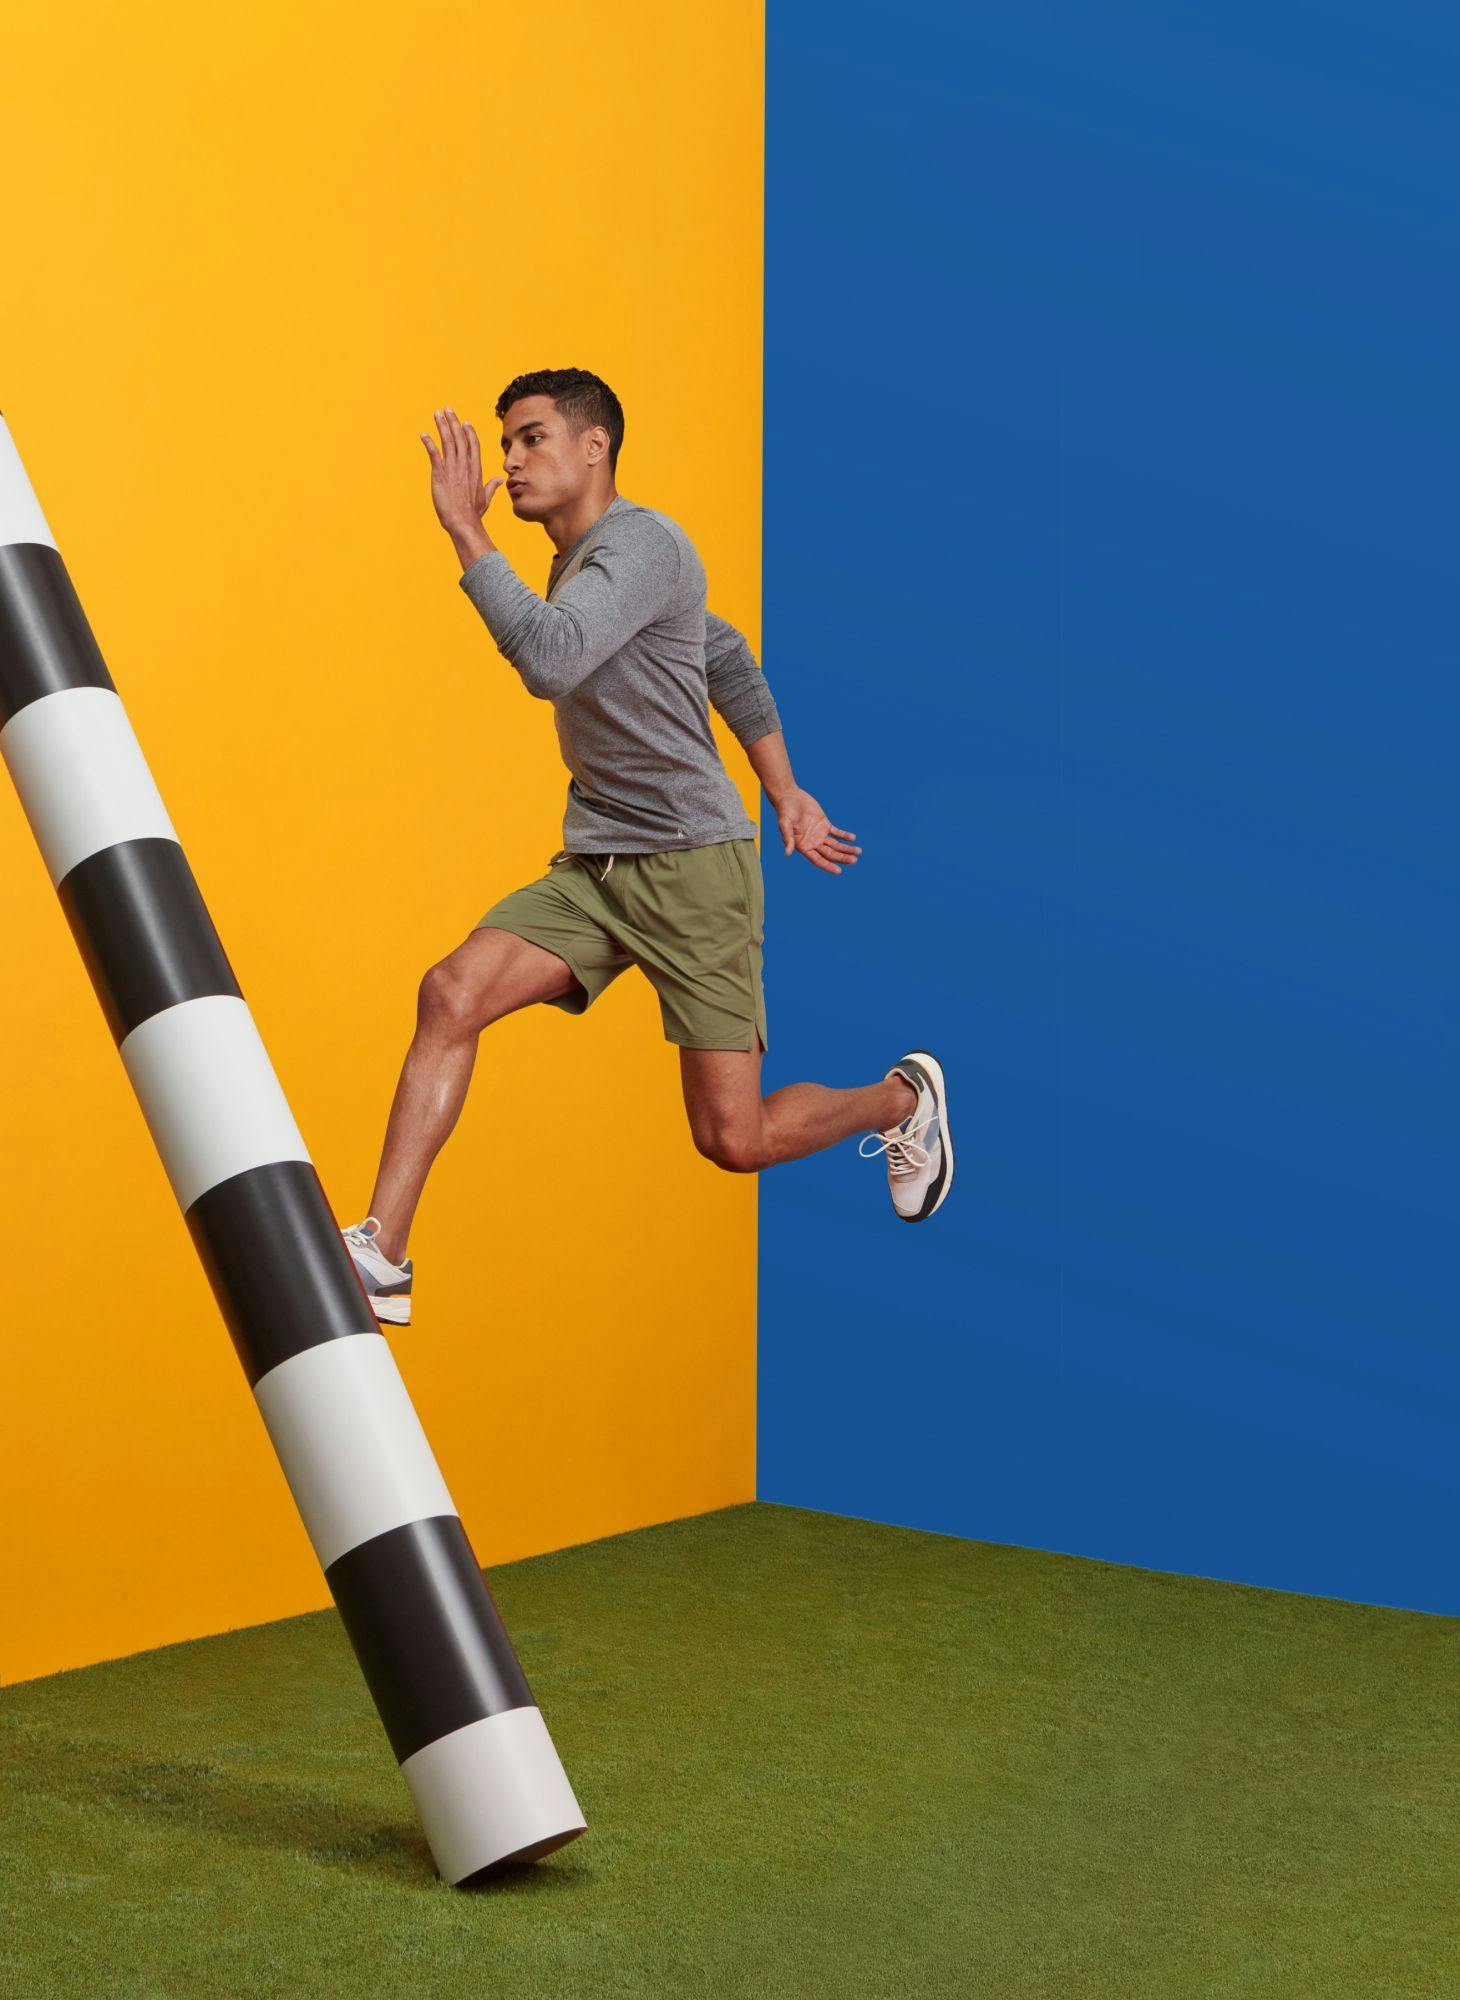 Man leaping in front of a blue and yellow background near a black and white striped pole